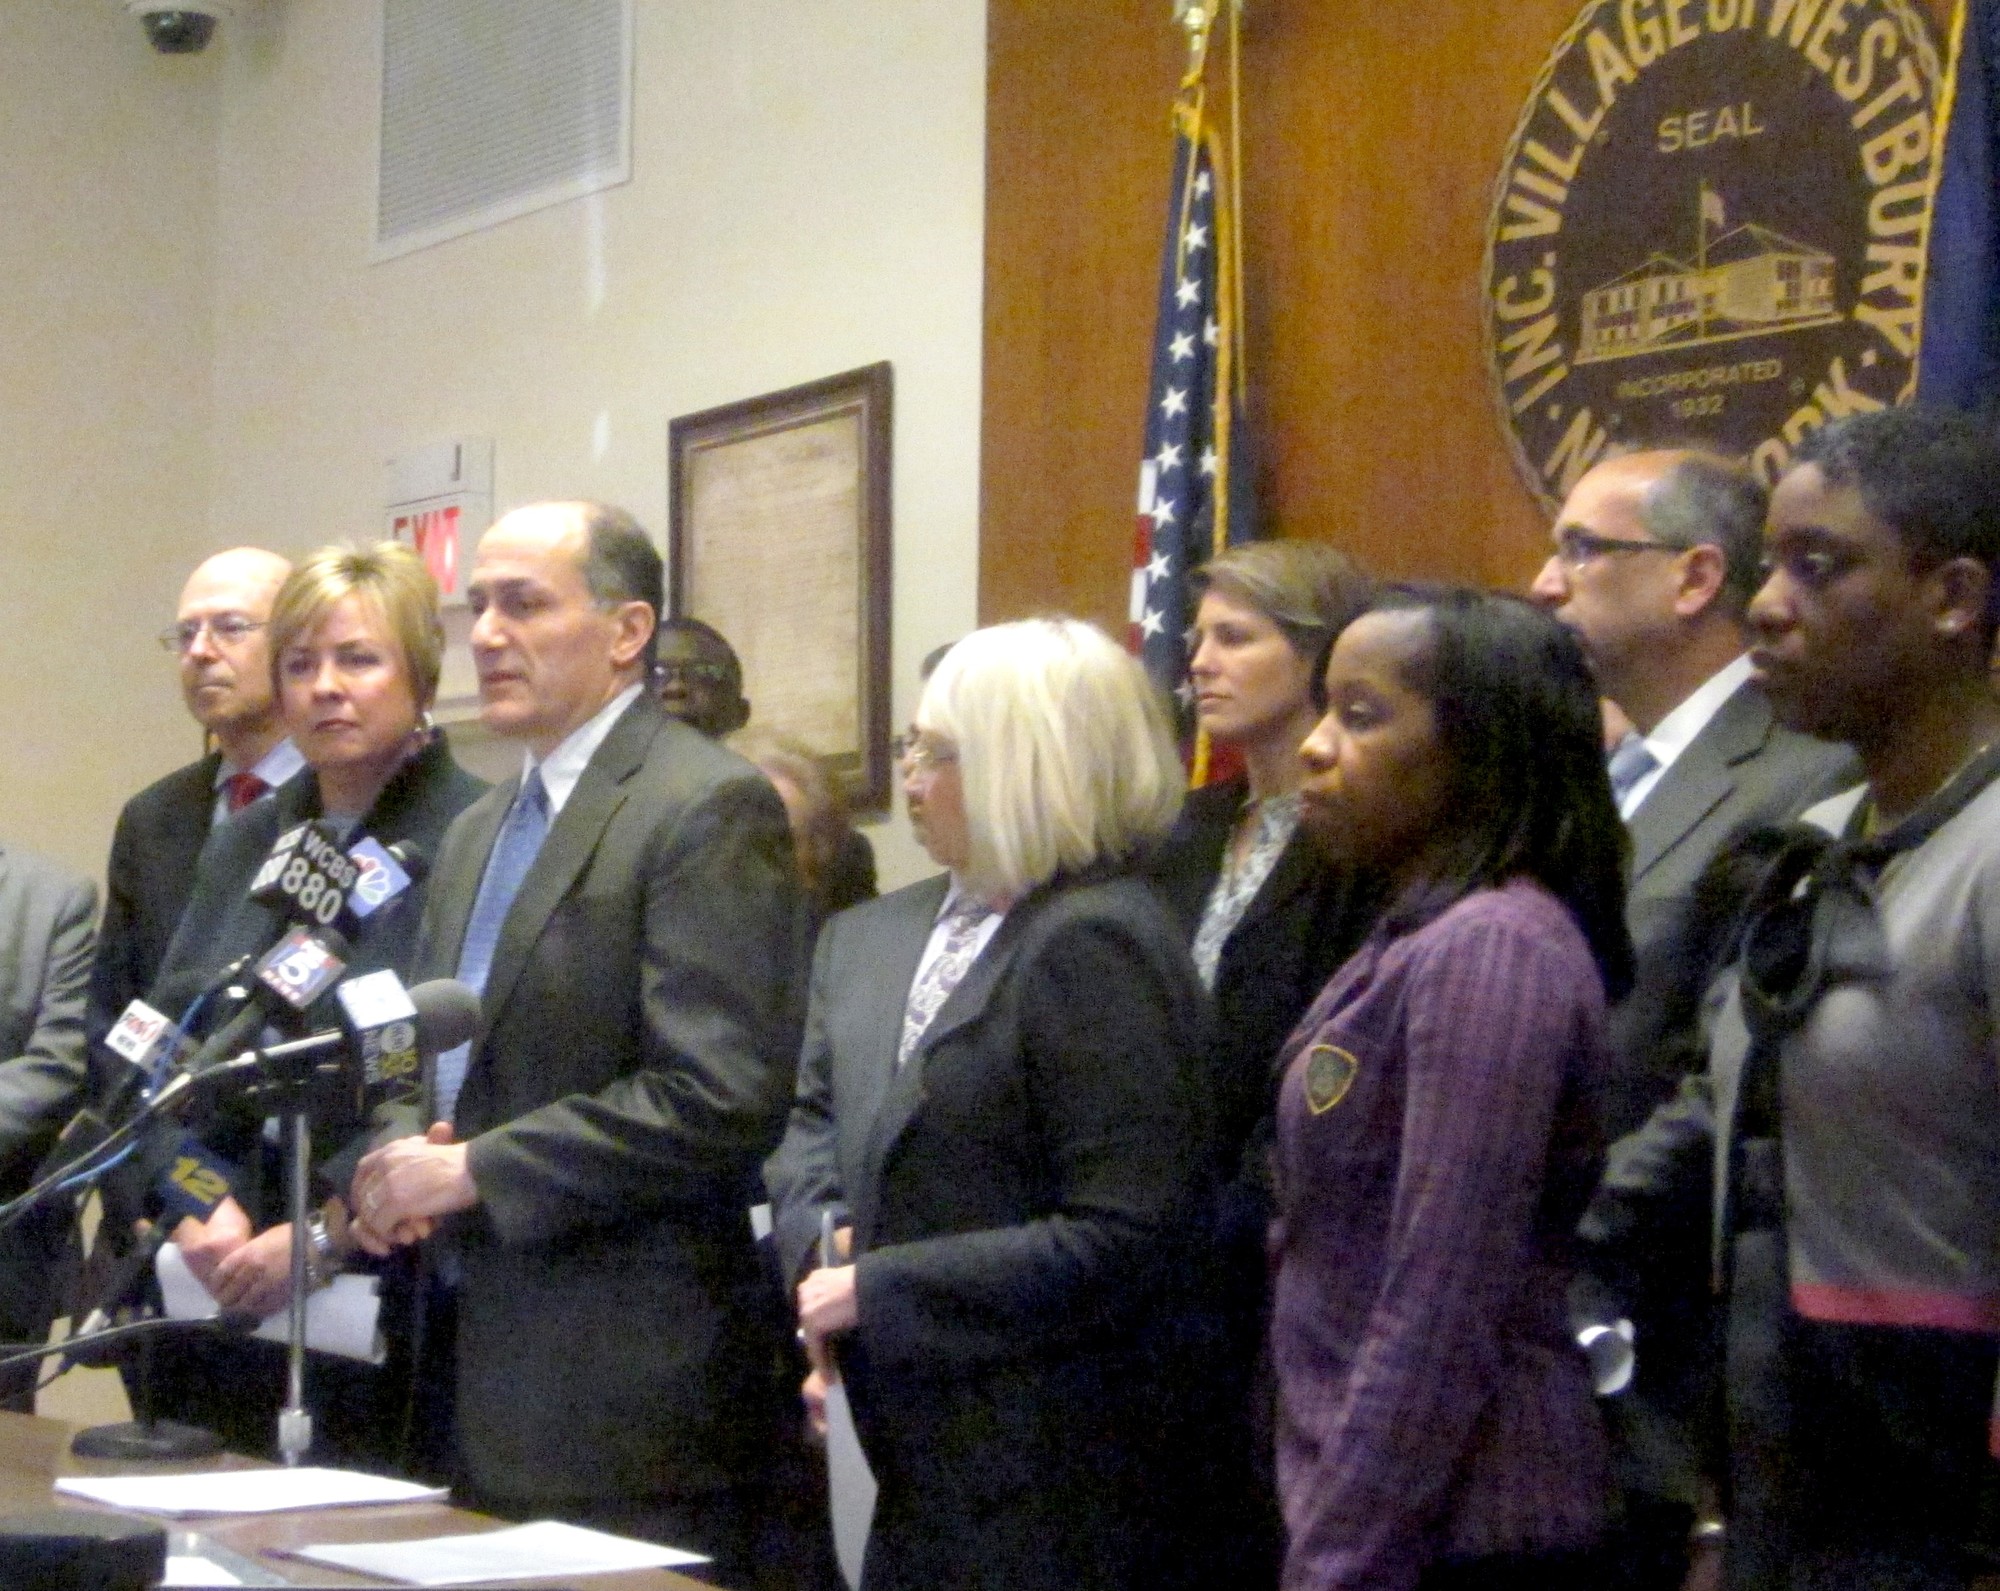 Westbury Mayor Peter Cavallaro, joined to his right by Town of Hempstead Supervisor Kate Murray, and to his left by Town of North Hempstead Supervisor Judi Bosworth, Councilwoman Viviana Russell and Nassau County Legislator Siela Bynoe in Westbury Village Hall on Thursday, announced their intention to file a lawsuit against Nassau Off Track Betting in Nassau County Supreme Court.